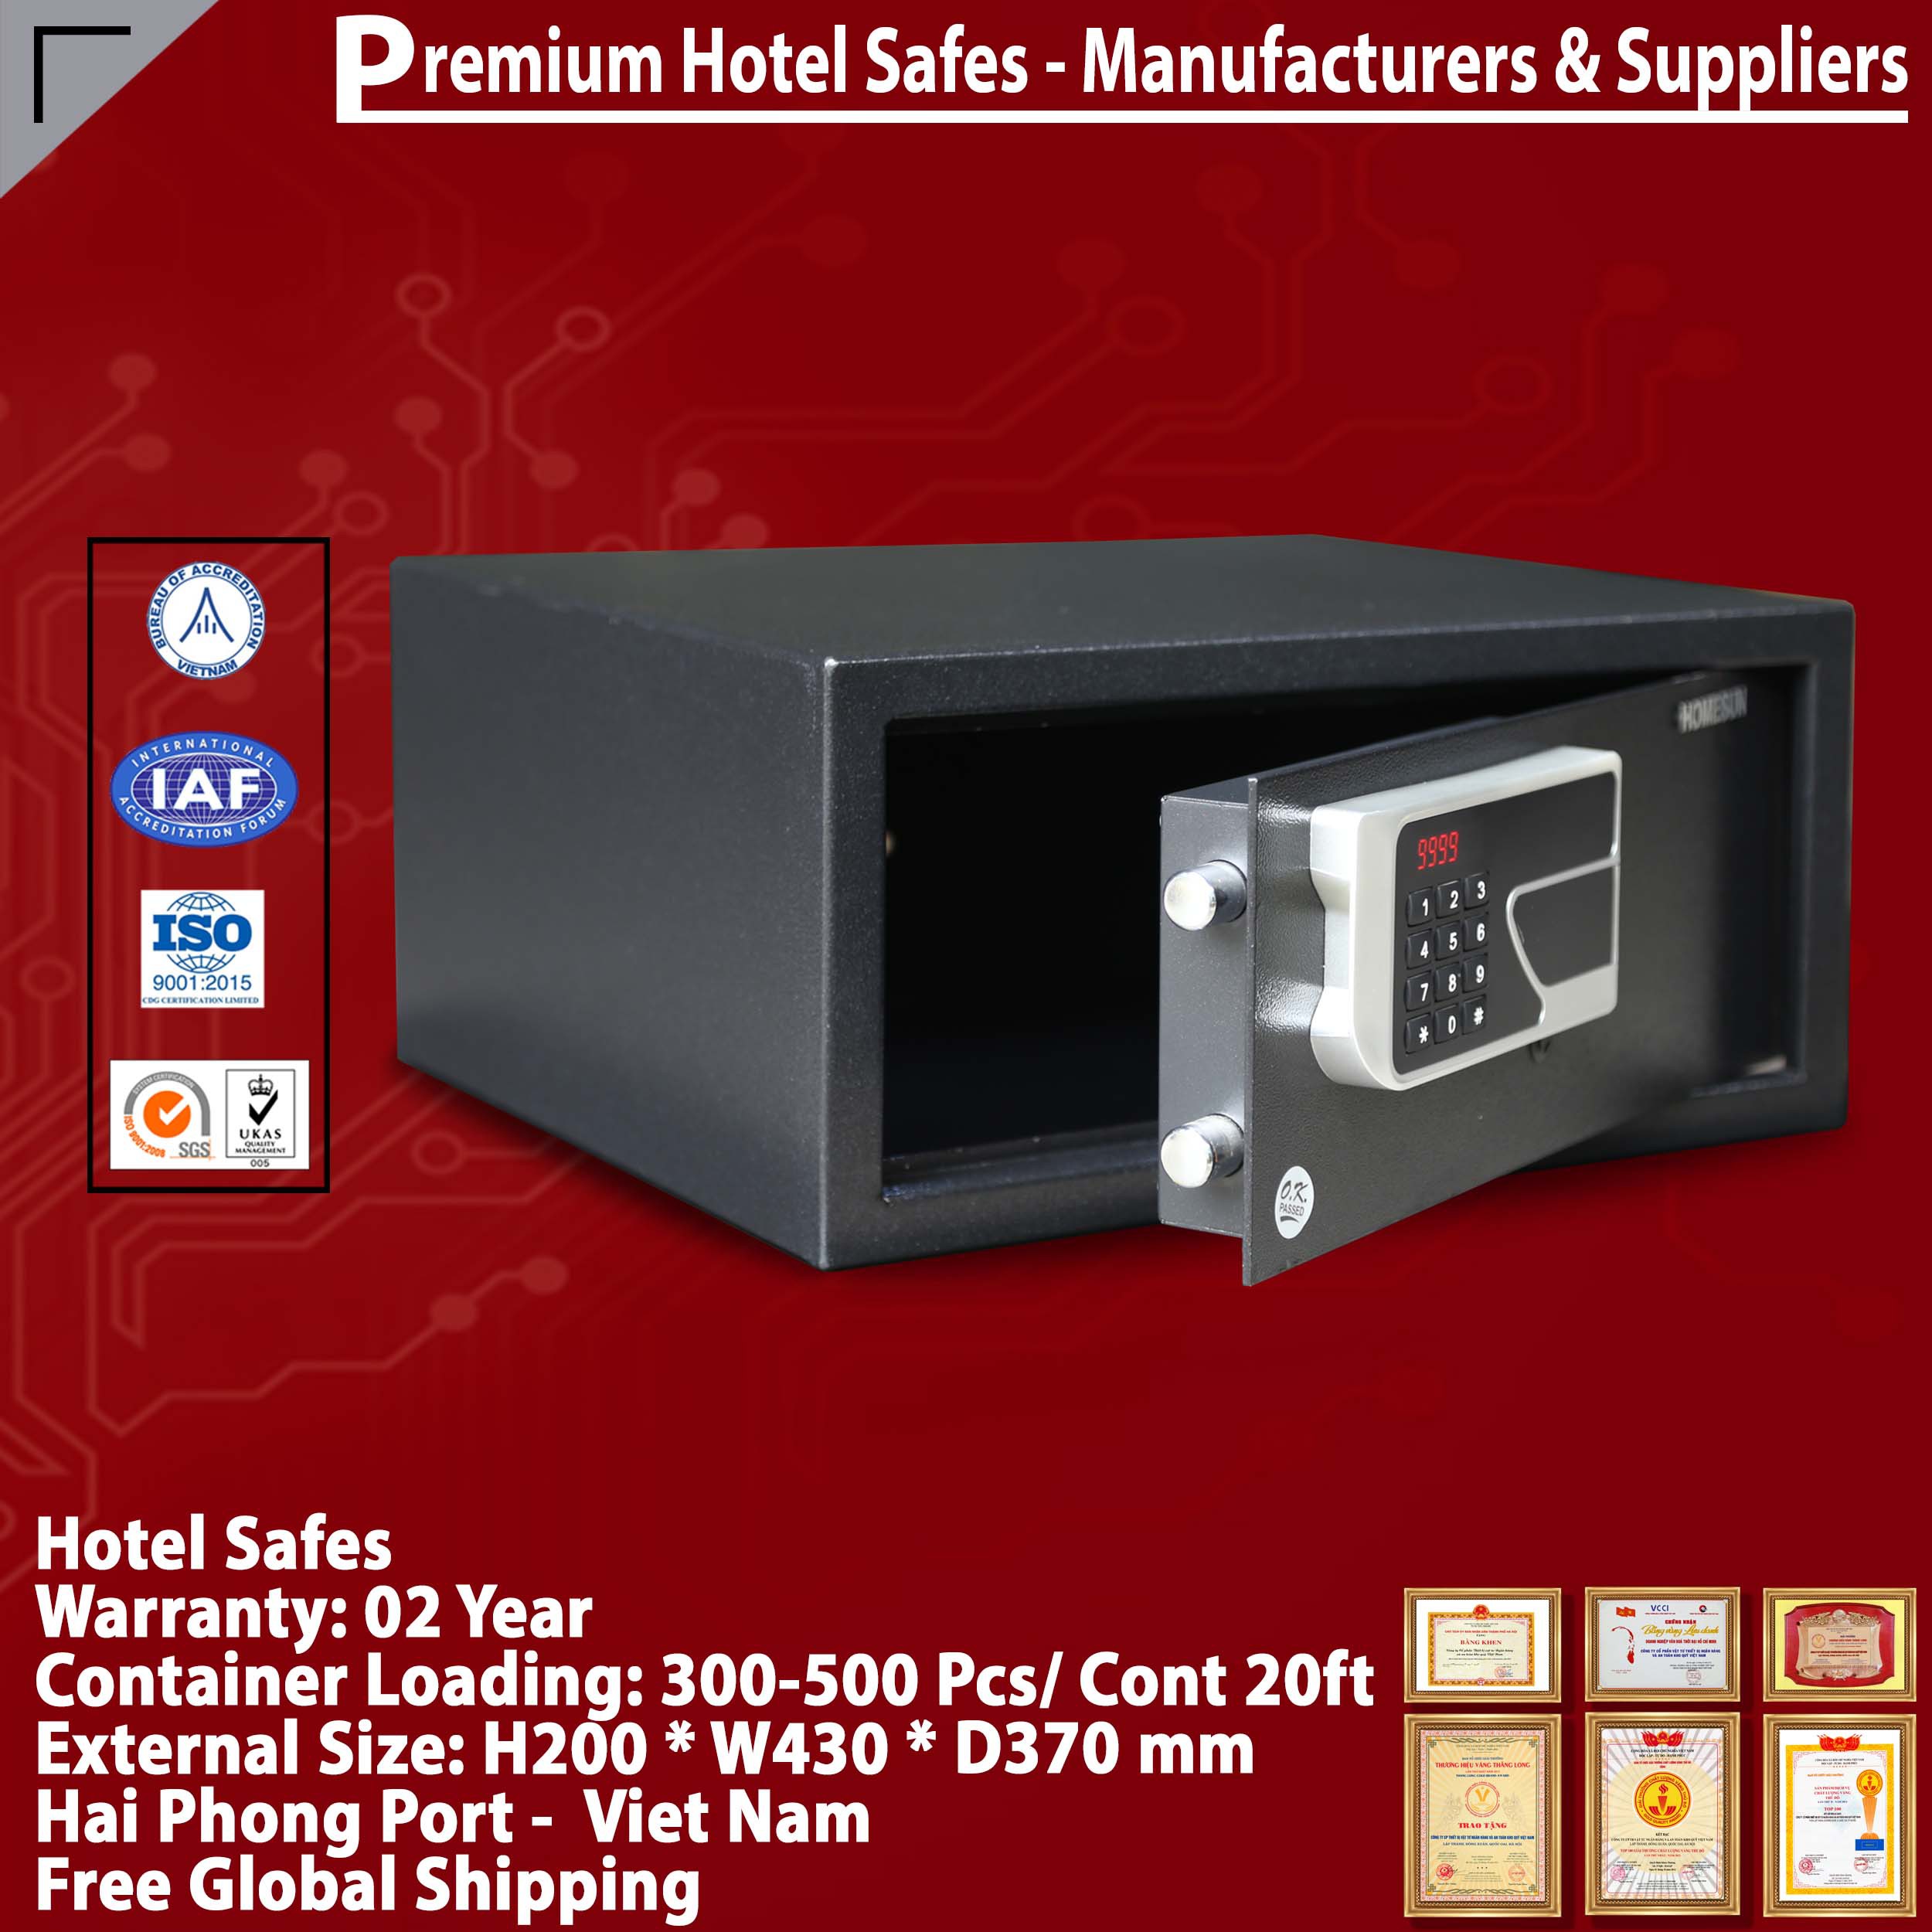 Best Sellers In Hotel Safes High Quality Price Ratio‎Box